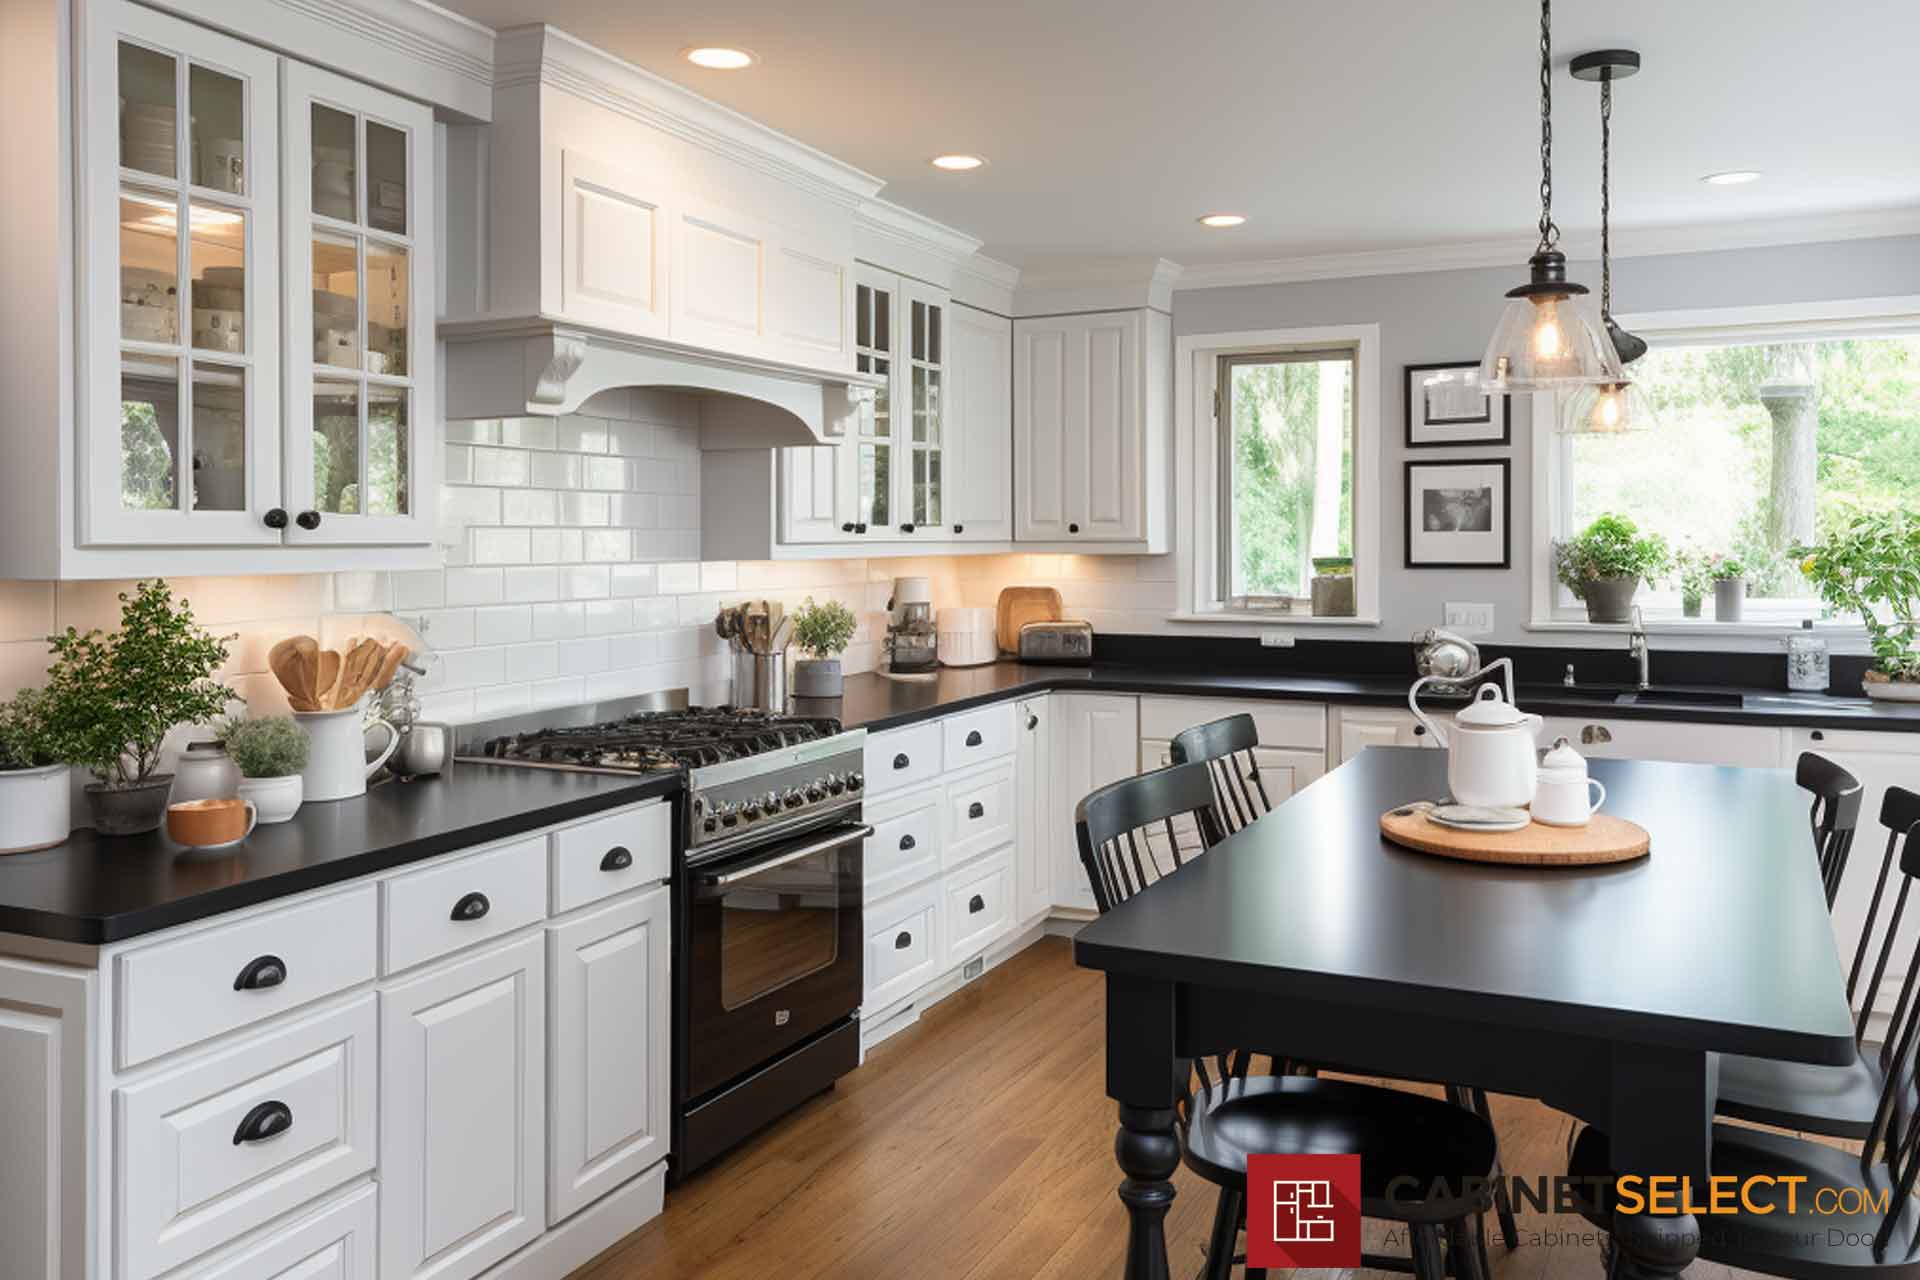 White Cabinets With Black Appliances